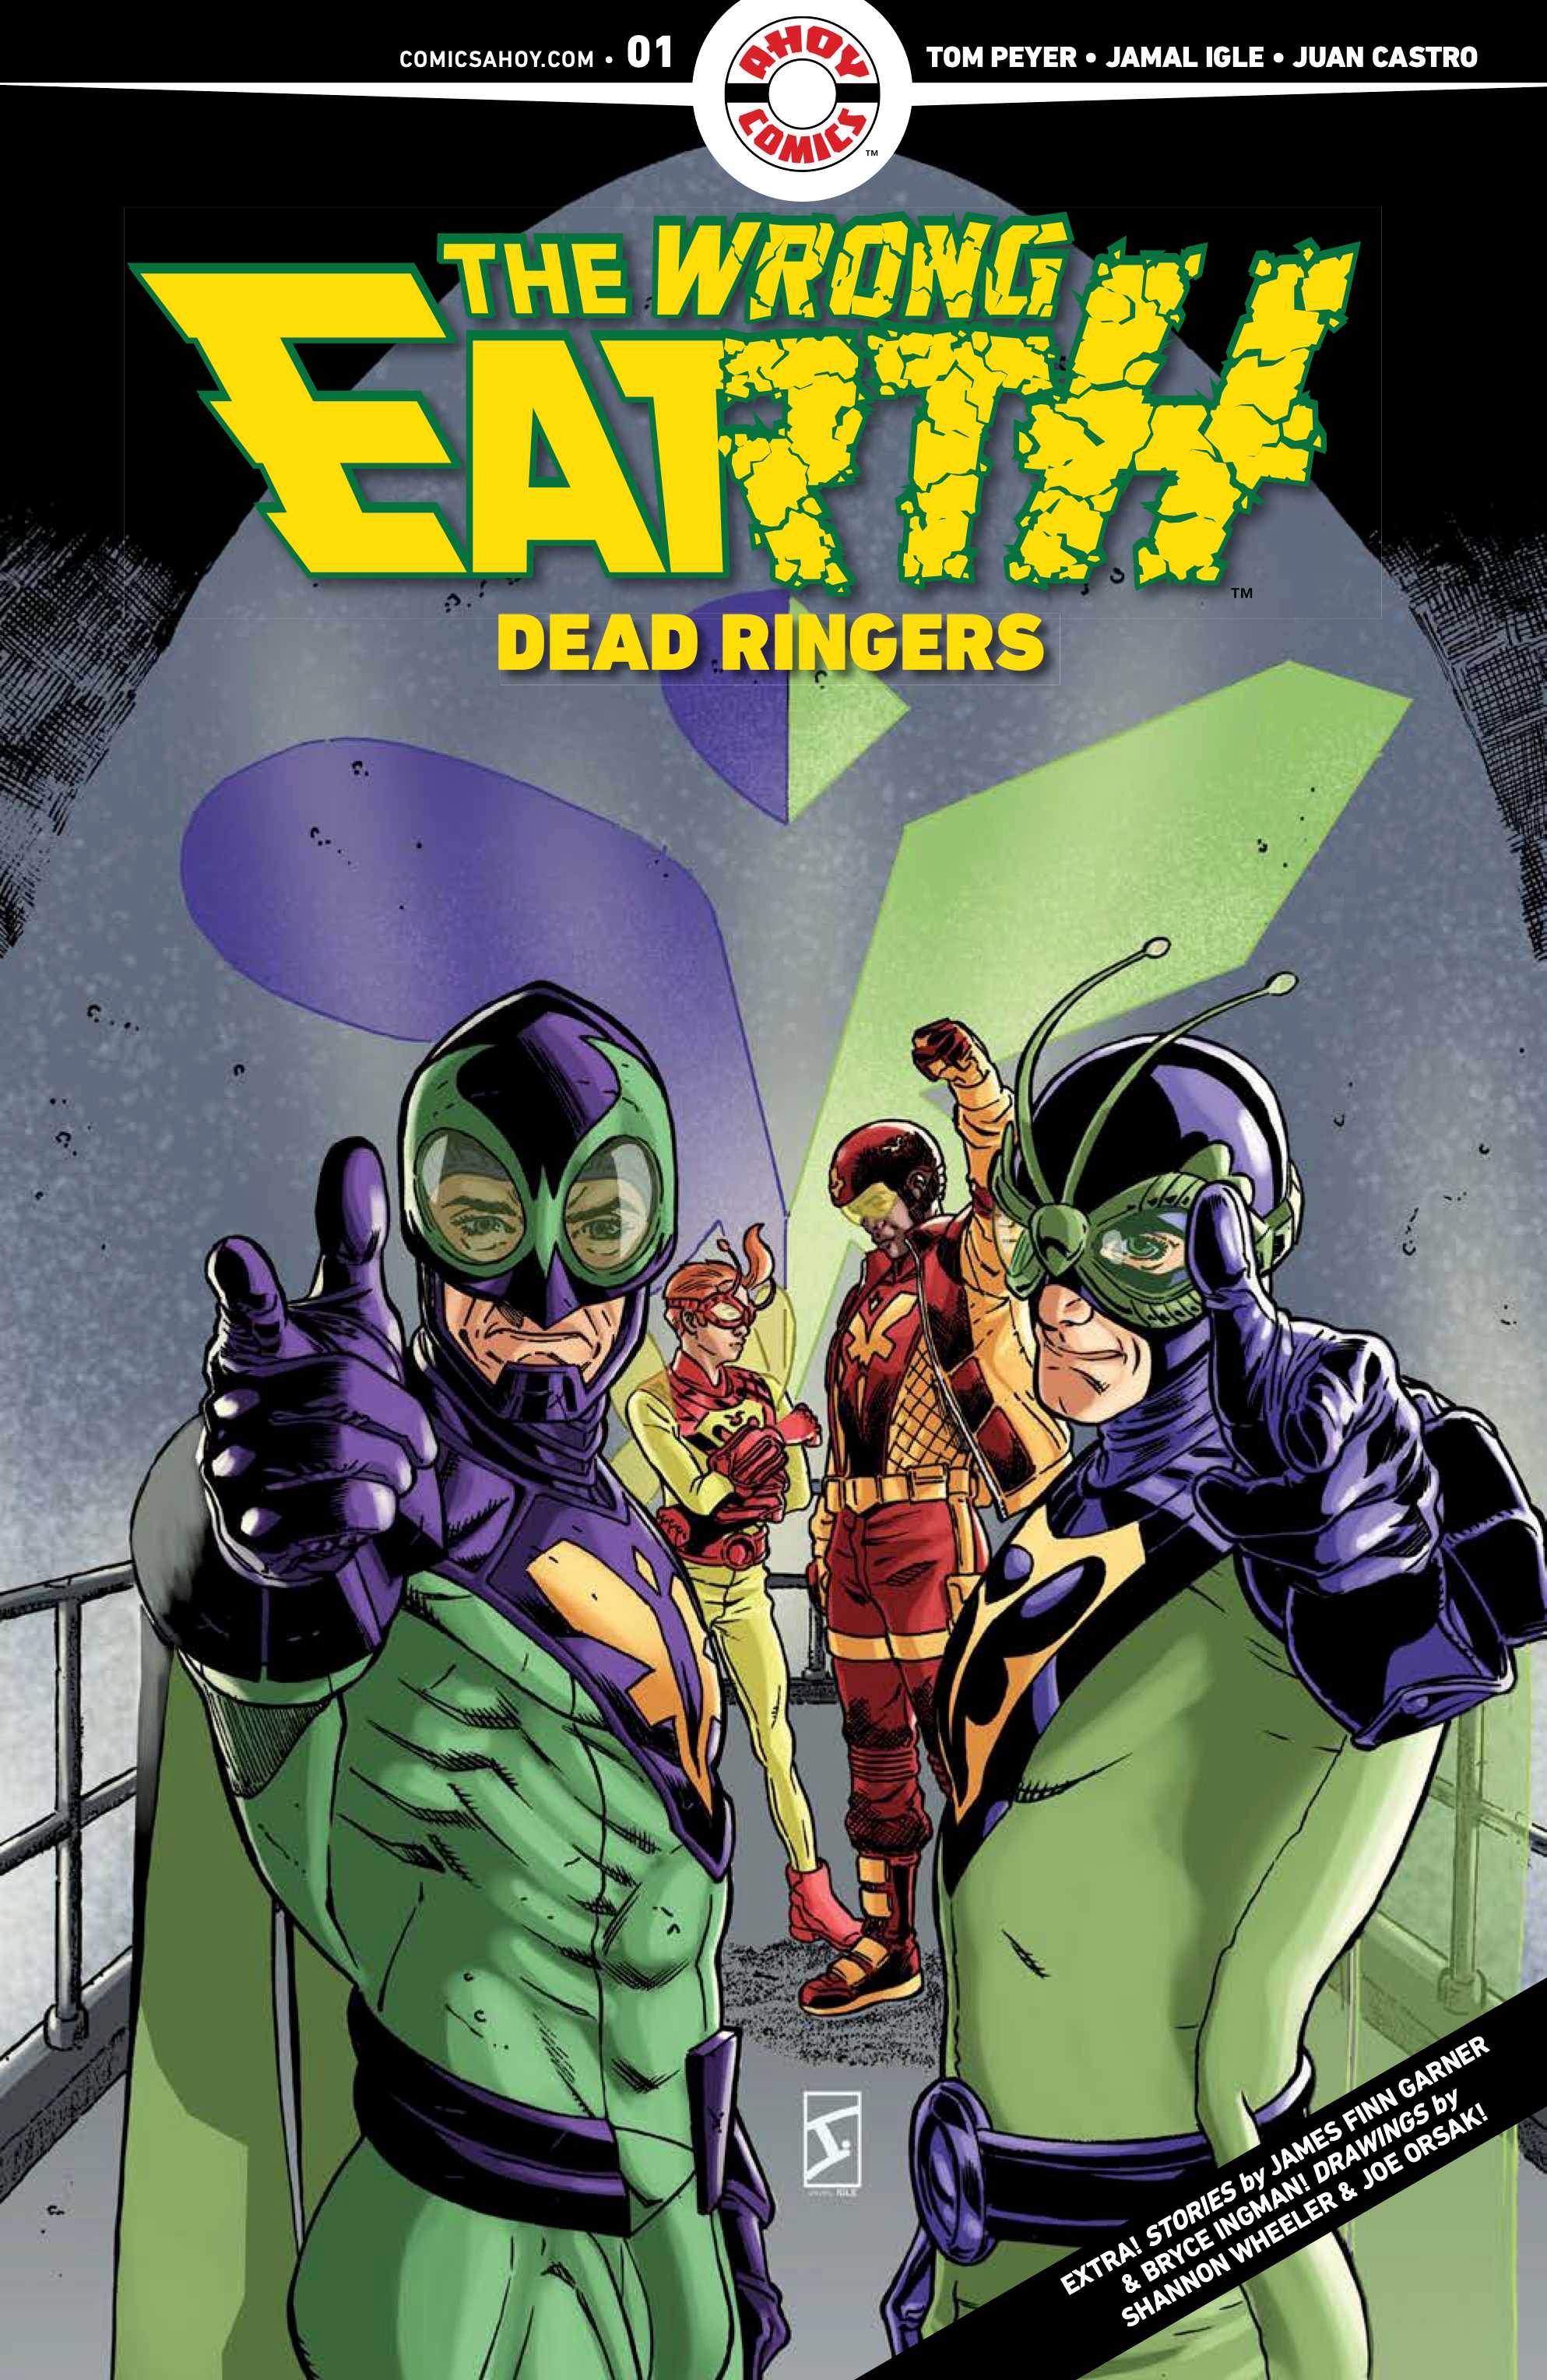 The Wrong Earth: Dead Ringers #1 cover art